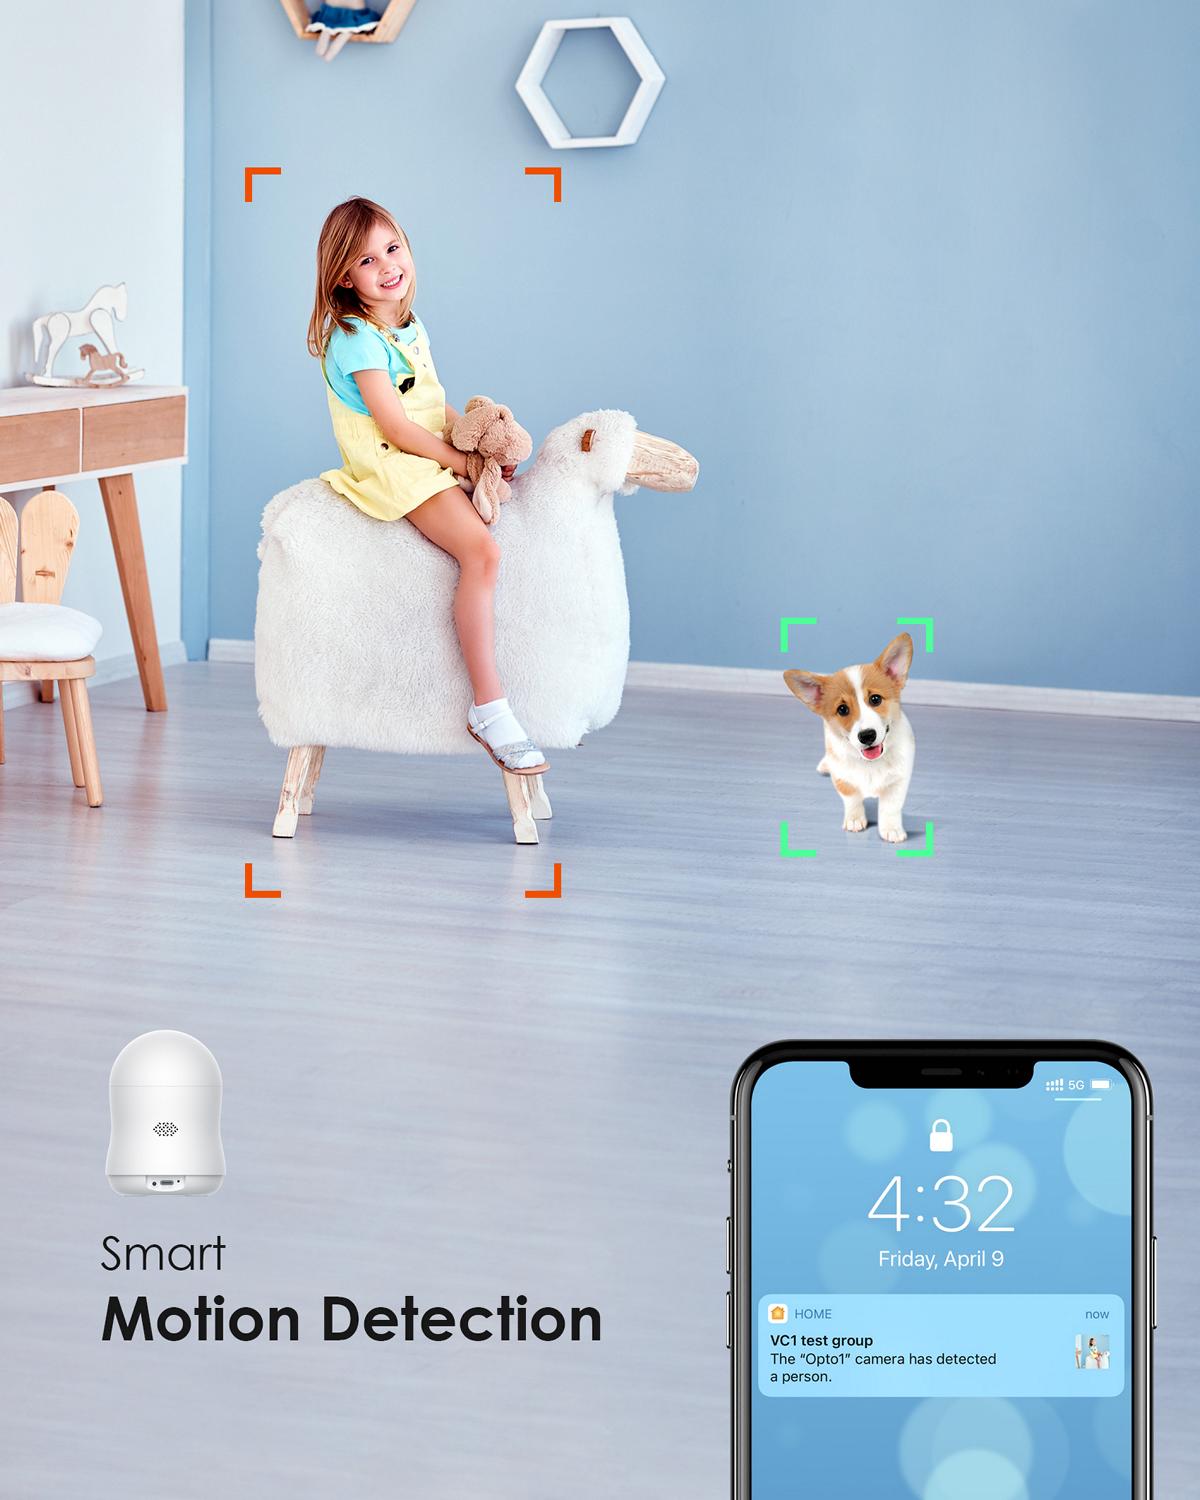 The motion sensor, combined with the HomeKit algorithm is able to distinguish between people, animals, and vehicles. Set automation based on motion. With an instant push notification to your iPhone, whether it's your kids, your pet, or delivery 